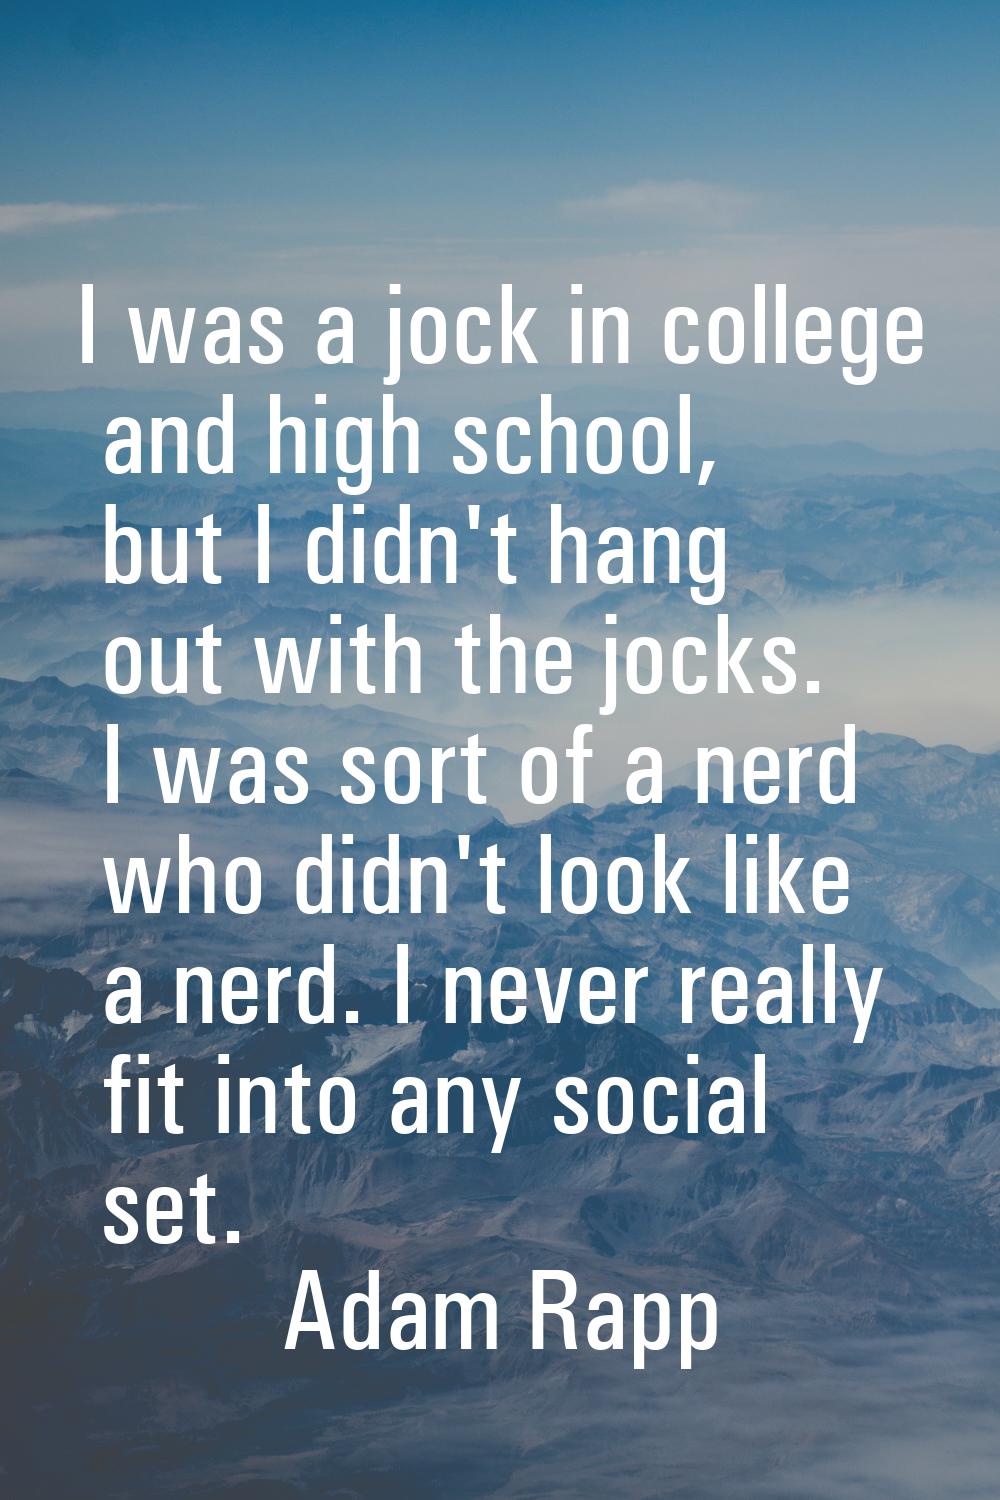 I was a jock in college and high school, but I didn't hang out with the jocks. I was sort of a nerd